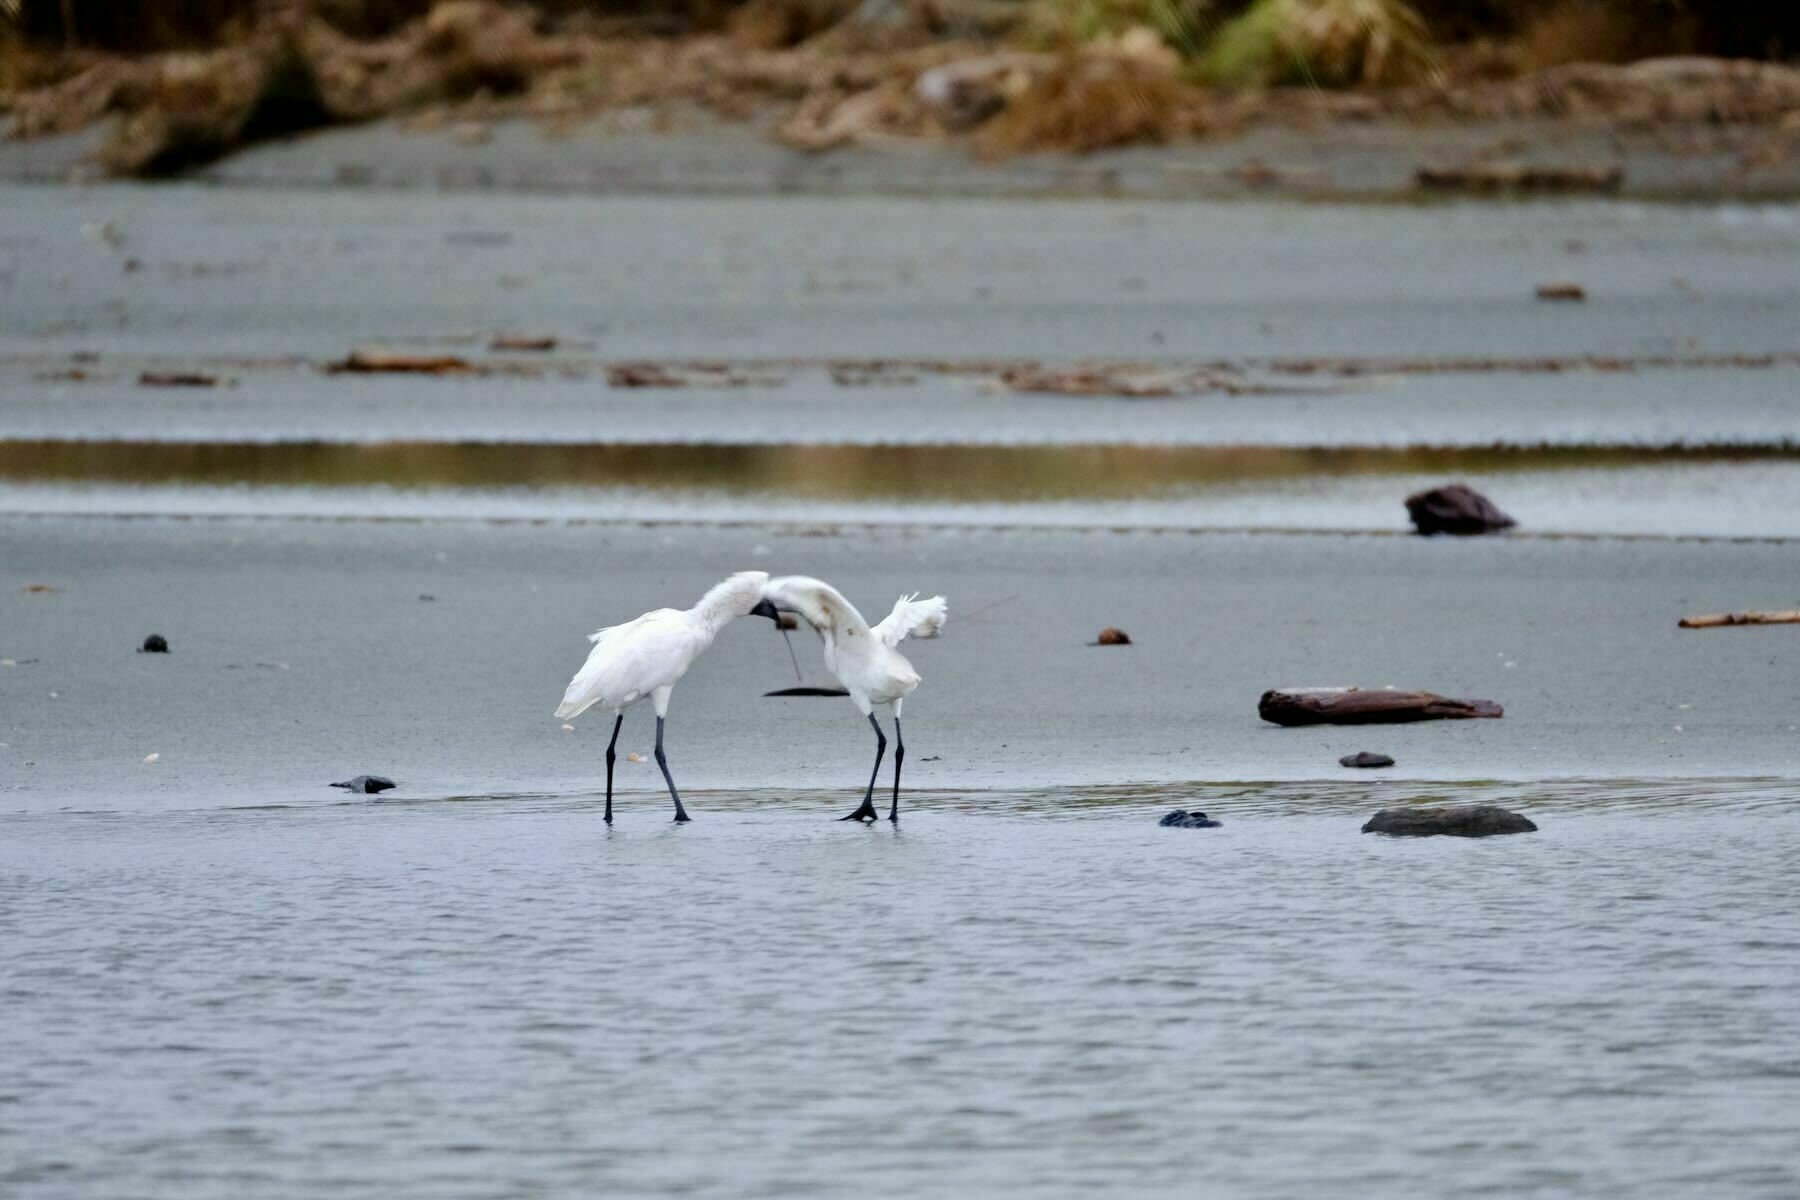 The adult spoonbill has its head by the juvenile. 